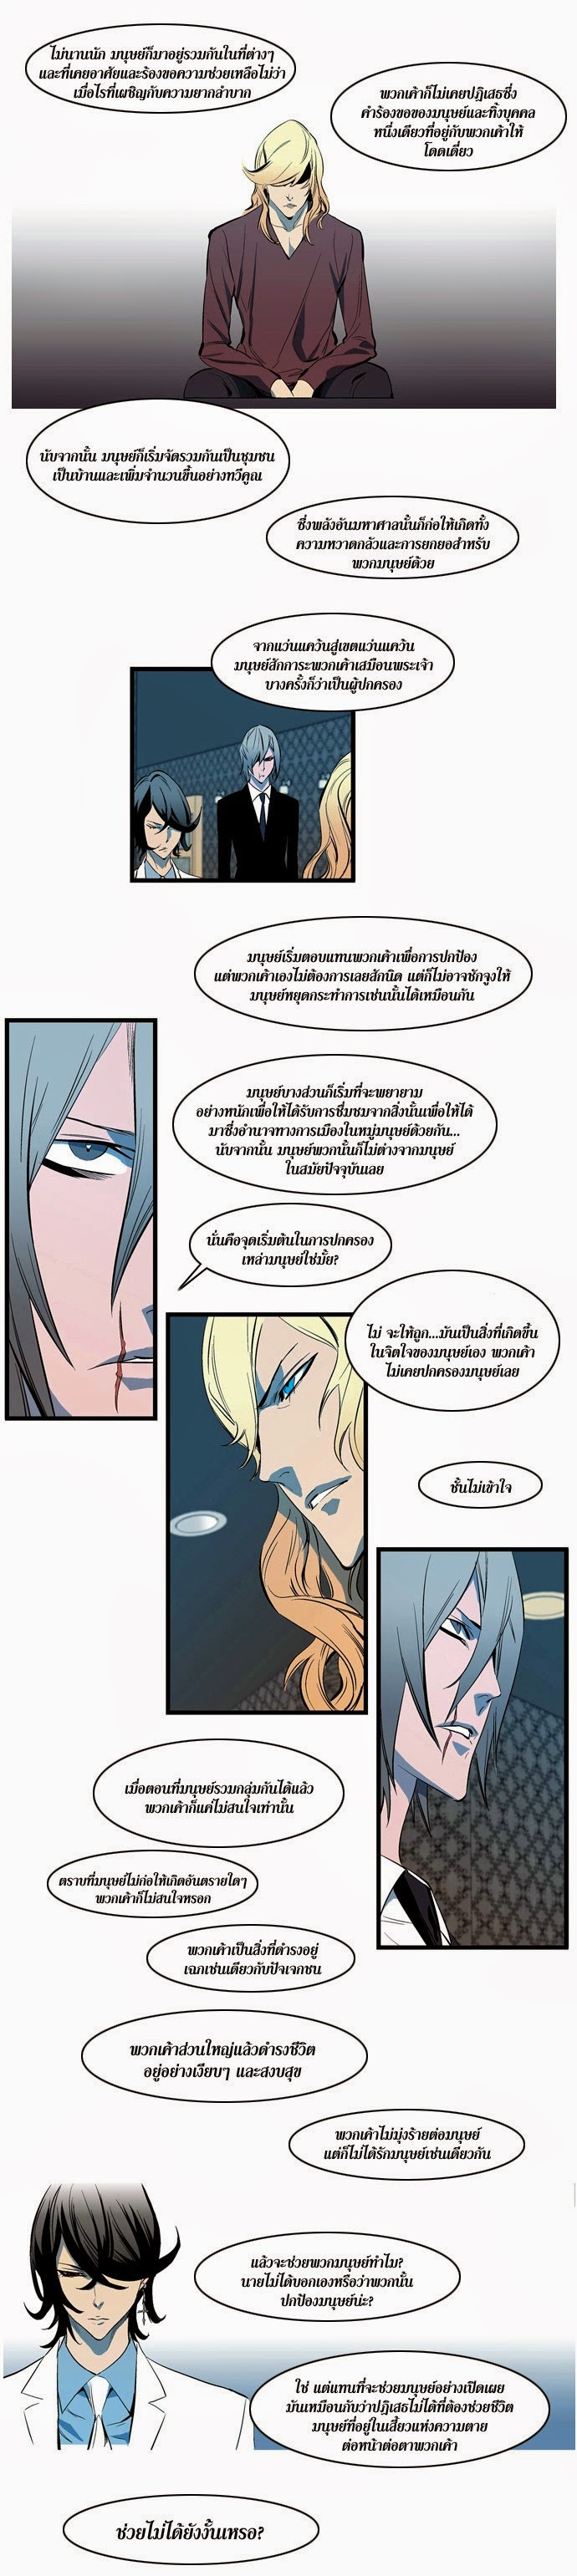 Noblesse 108 009